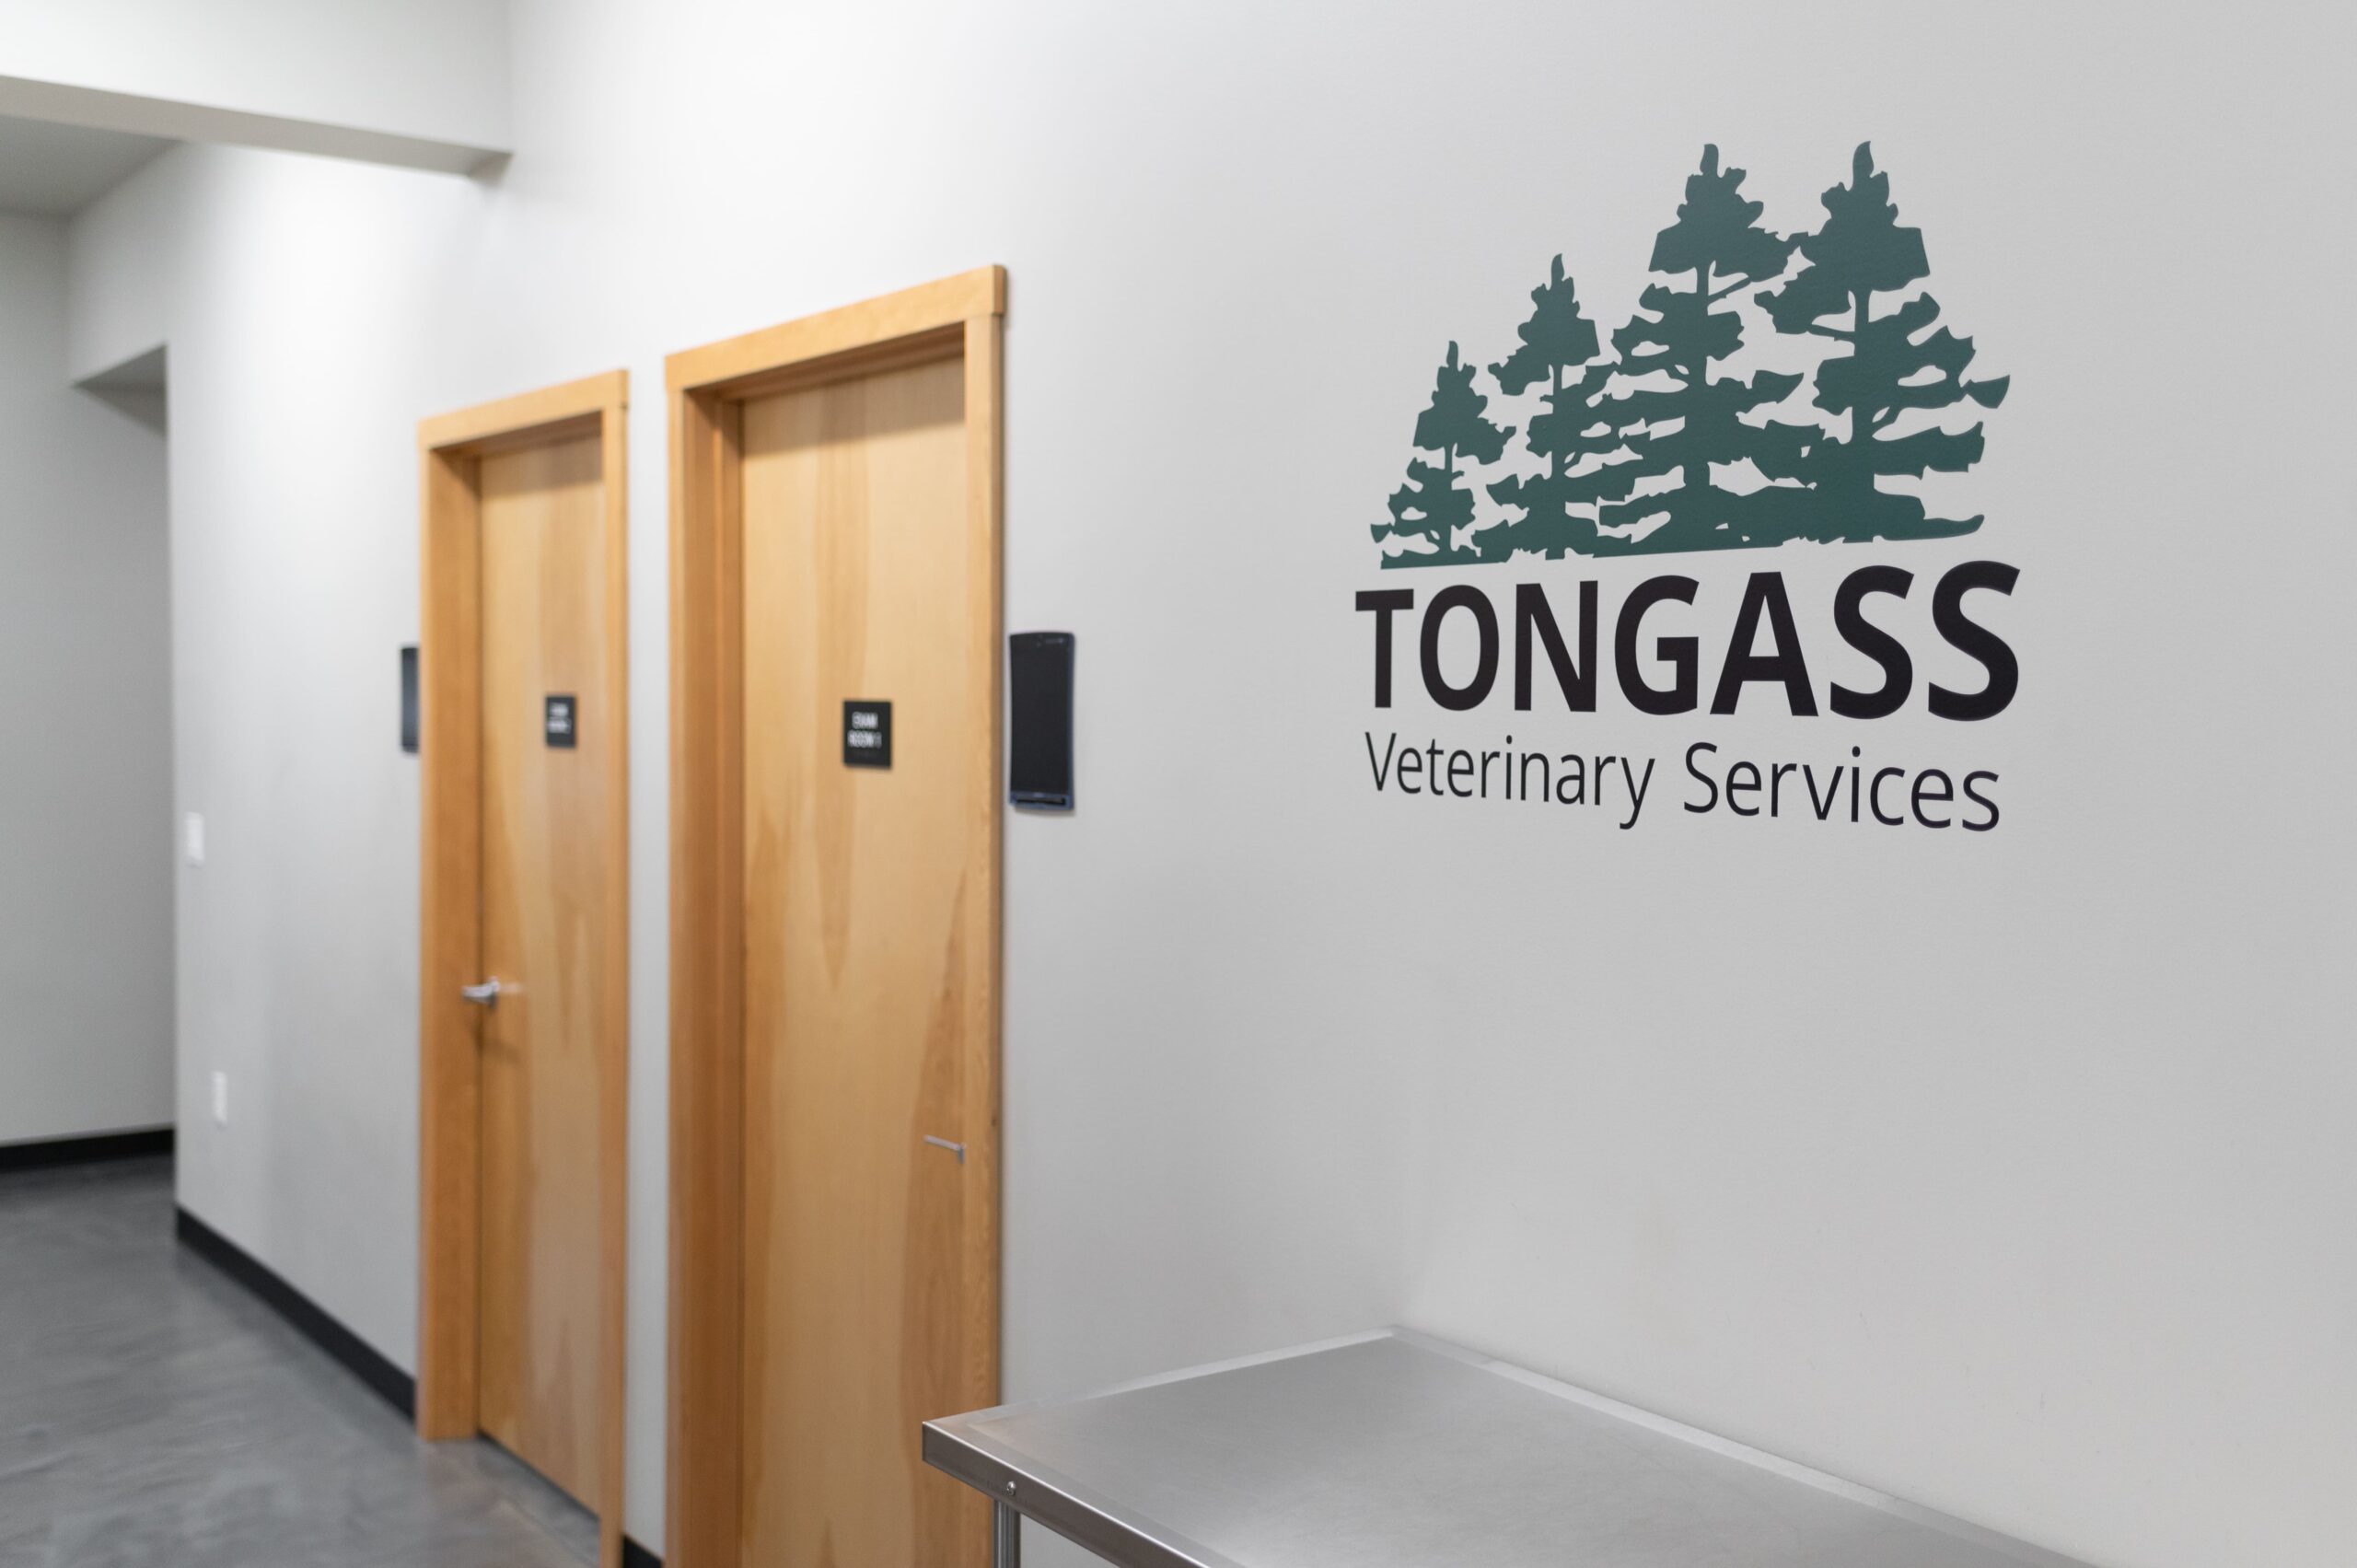 Tongass Veterinary Services hospital inside view